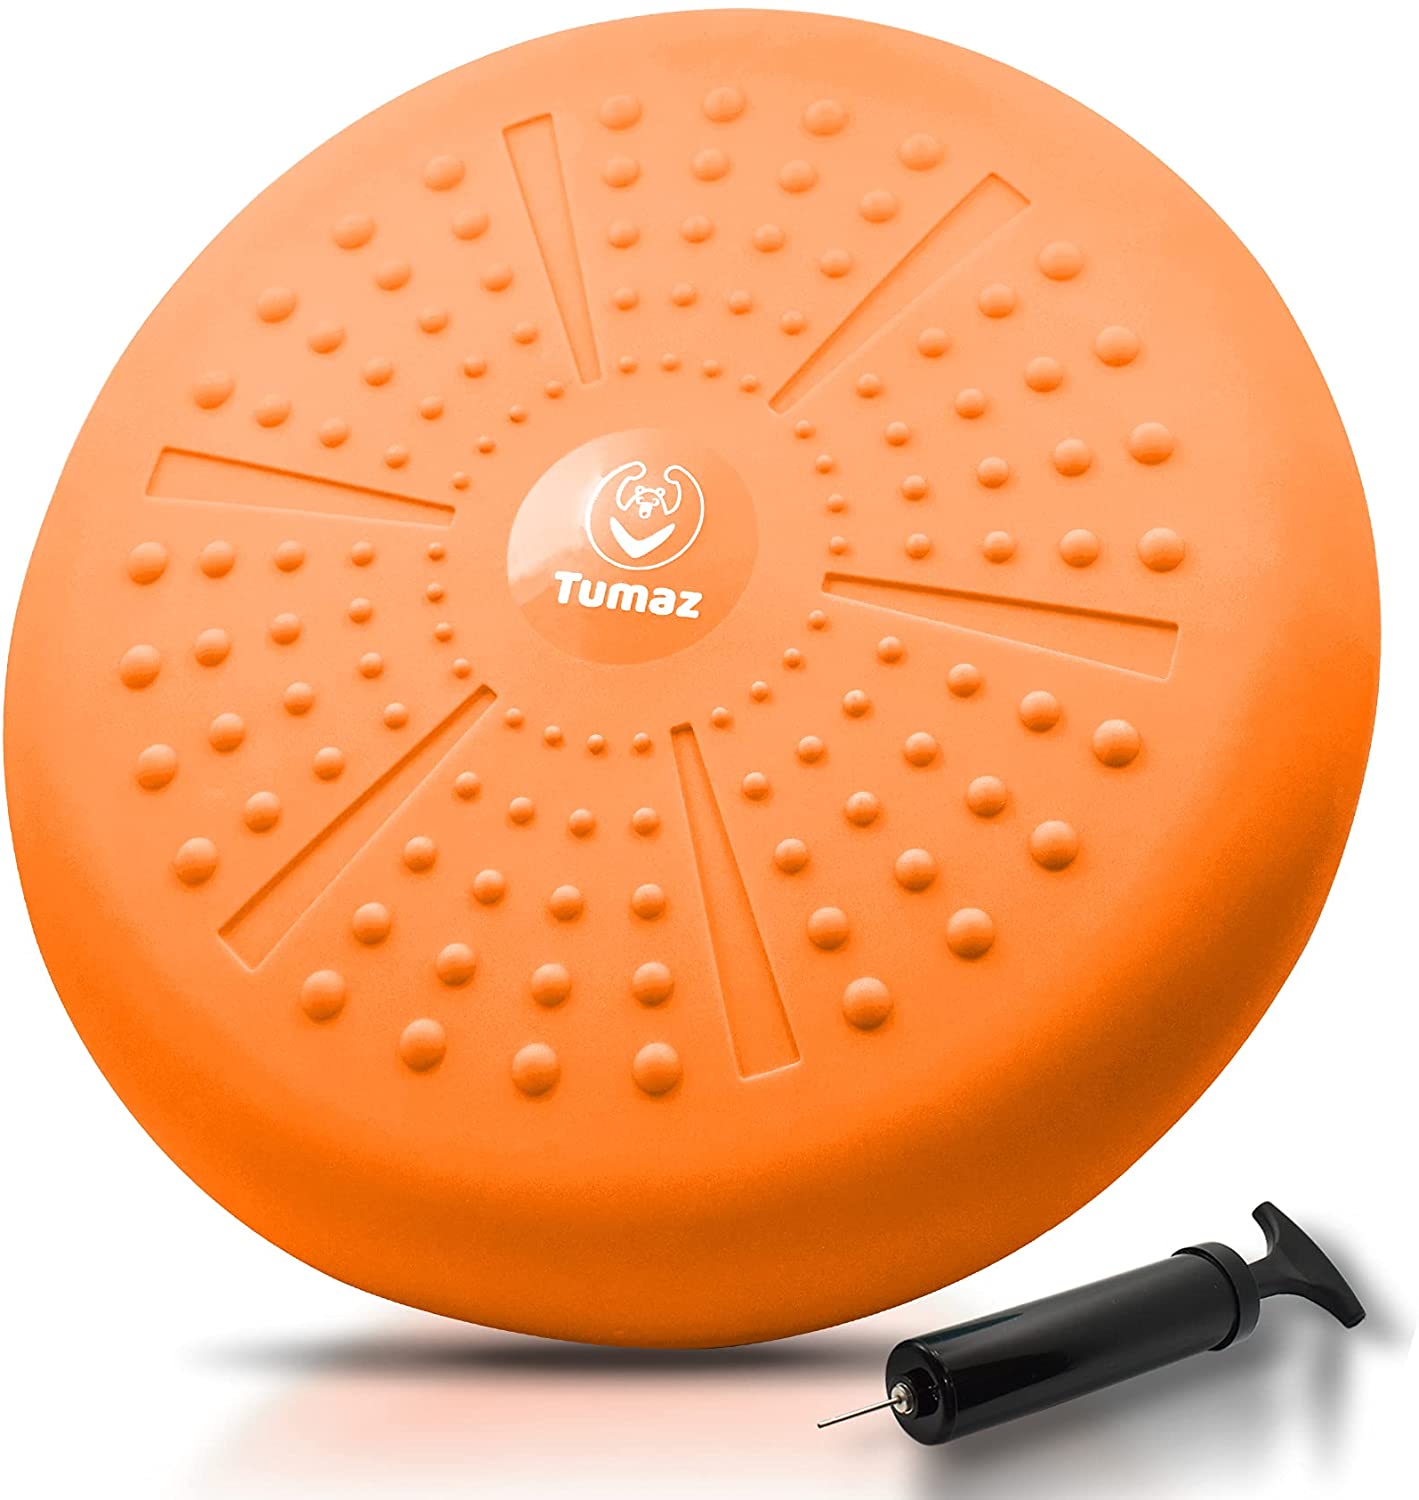 Tumaz Wobble Cushion - Wiggle Seat to Improve Sitting Posture & Stay  Focused for Sensory Kids, Balance Disc to Core Strength & Flexible Seating  Extra Thick Balance Board, Pump Included Wobble Board